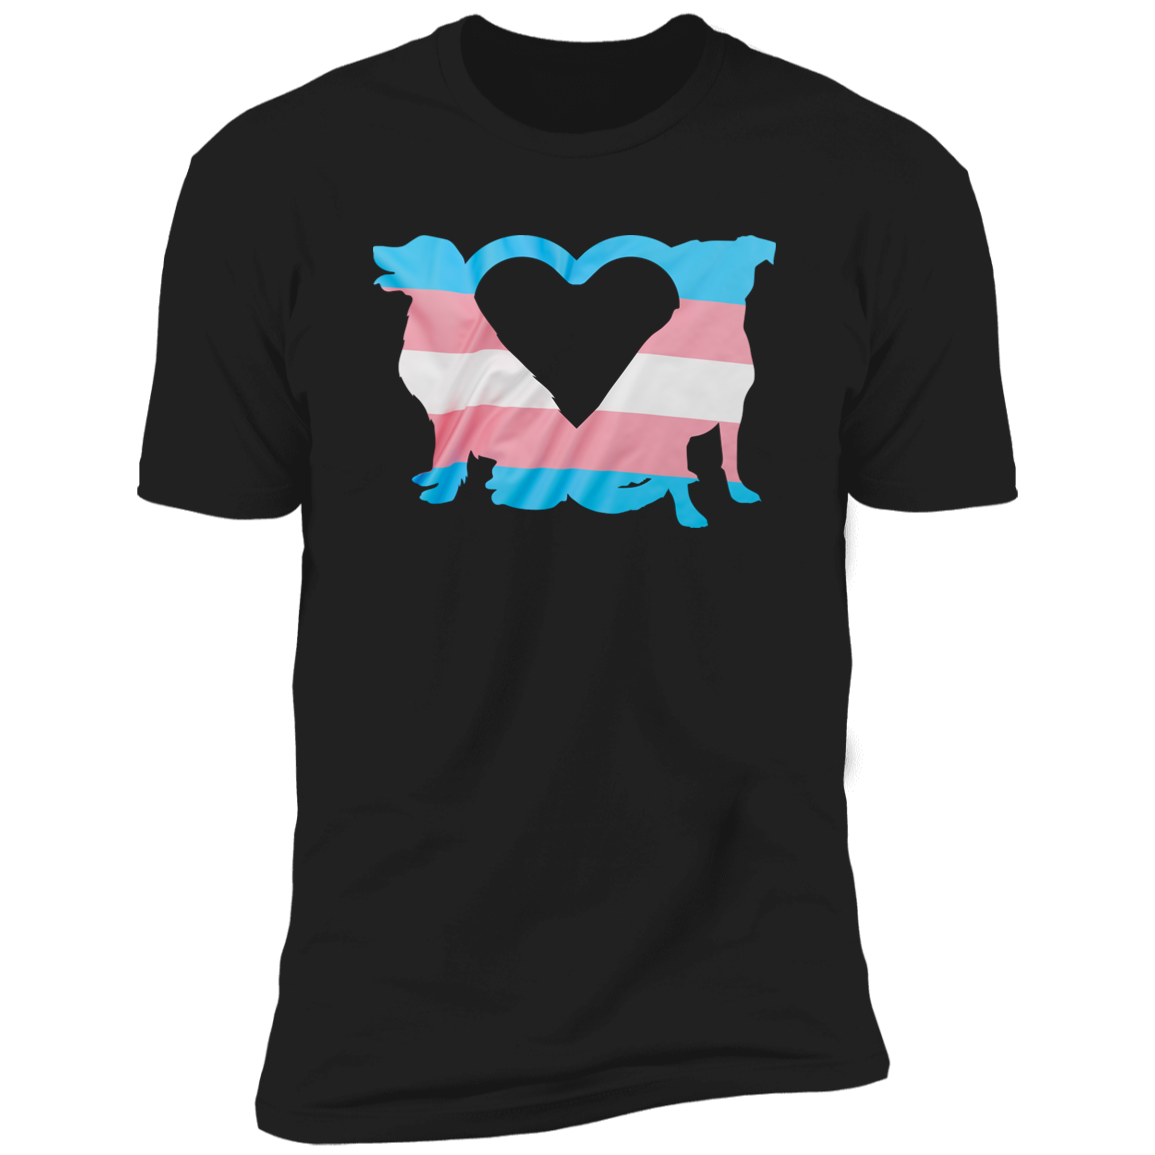 Trans Pride Dogs Heart Pride T-shirt, Trans Pride Dog Shirt for humans, in black